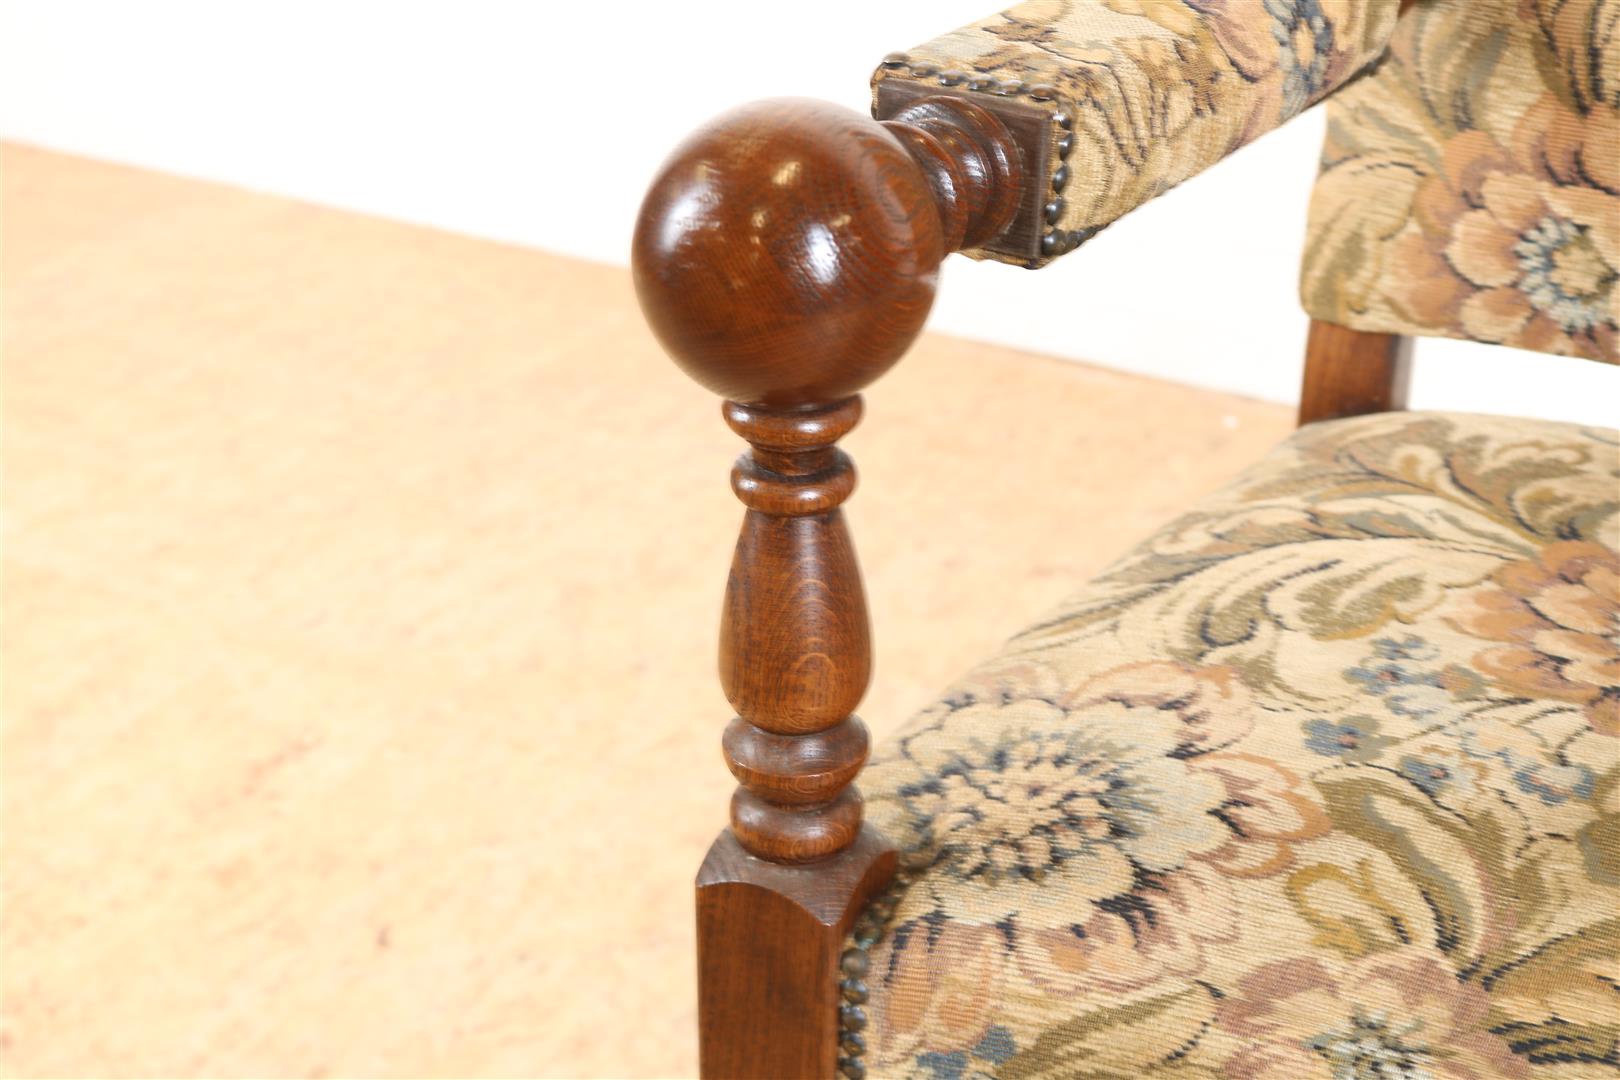 Oak Renaissance style armchair with embroidered upholstery. - Image 3 of 4